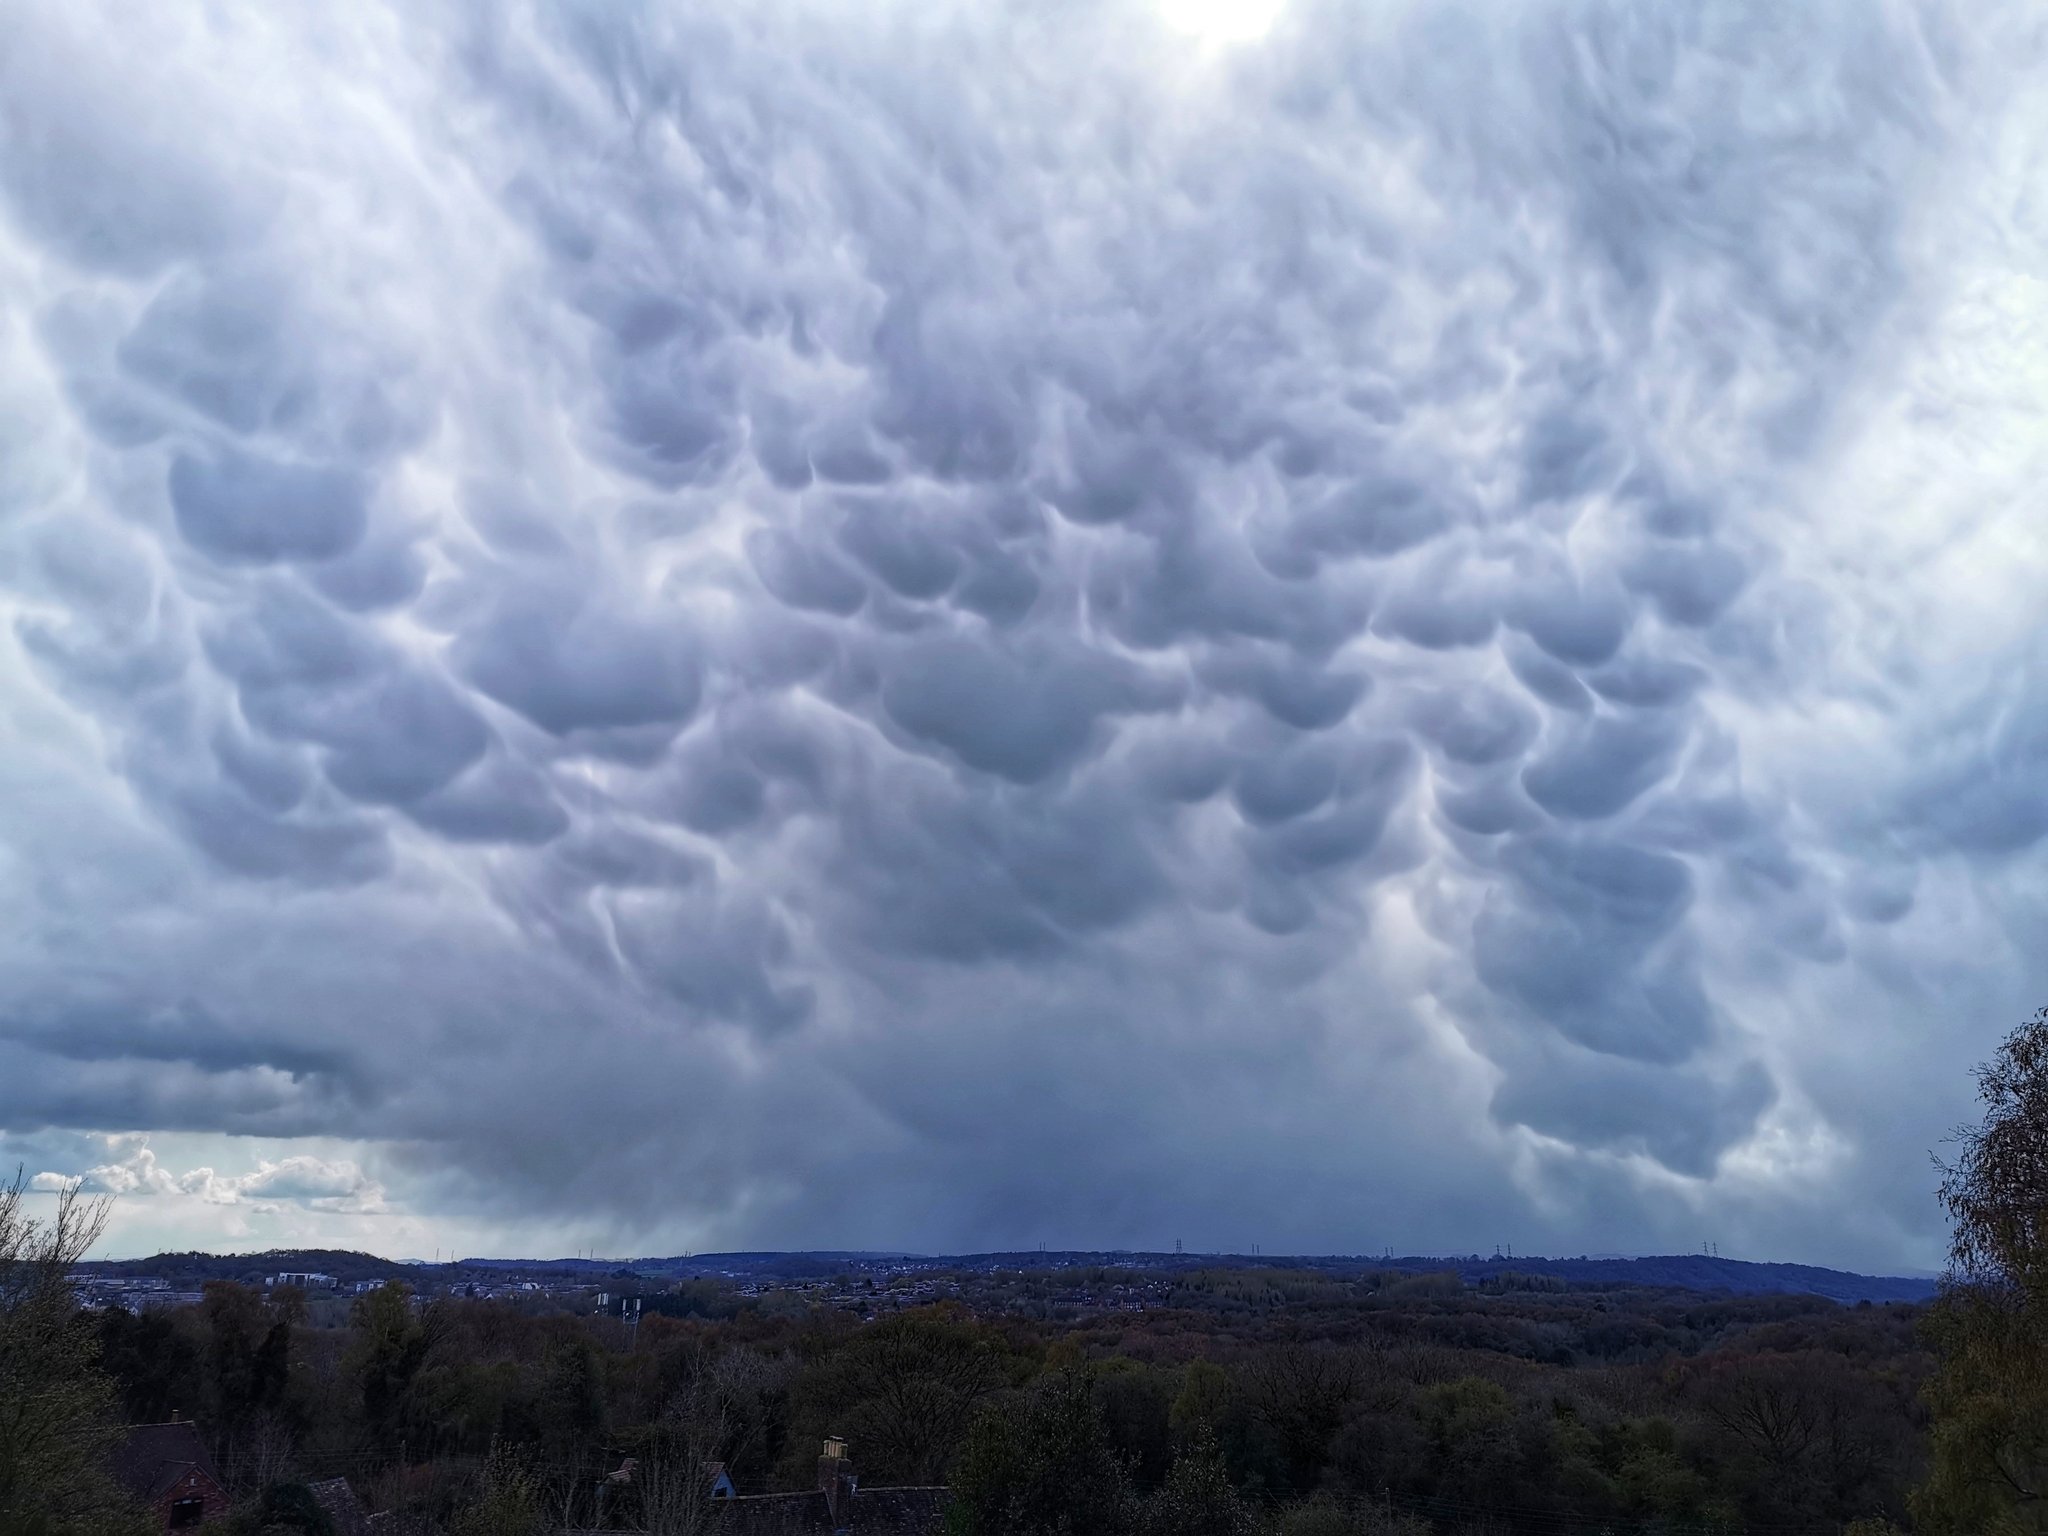 2nd Place Mammatus clouds over Shropshire by Liam Ball @Liam_Ball92